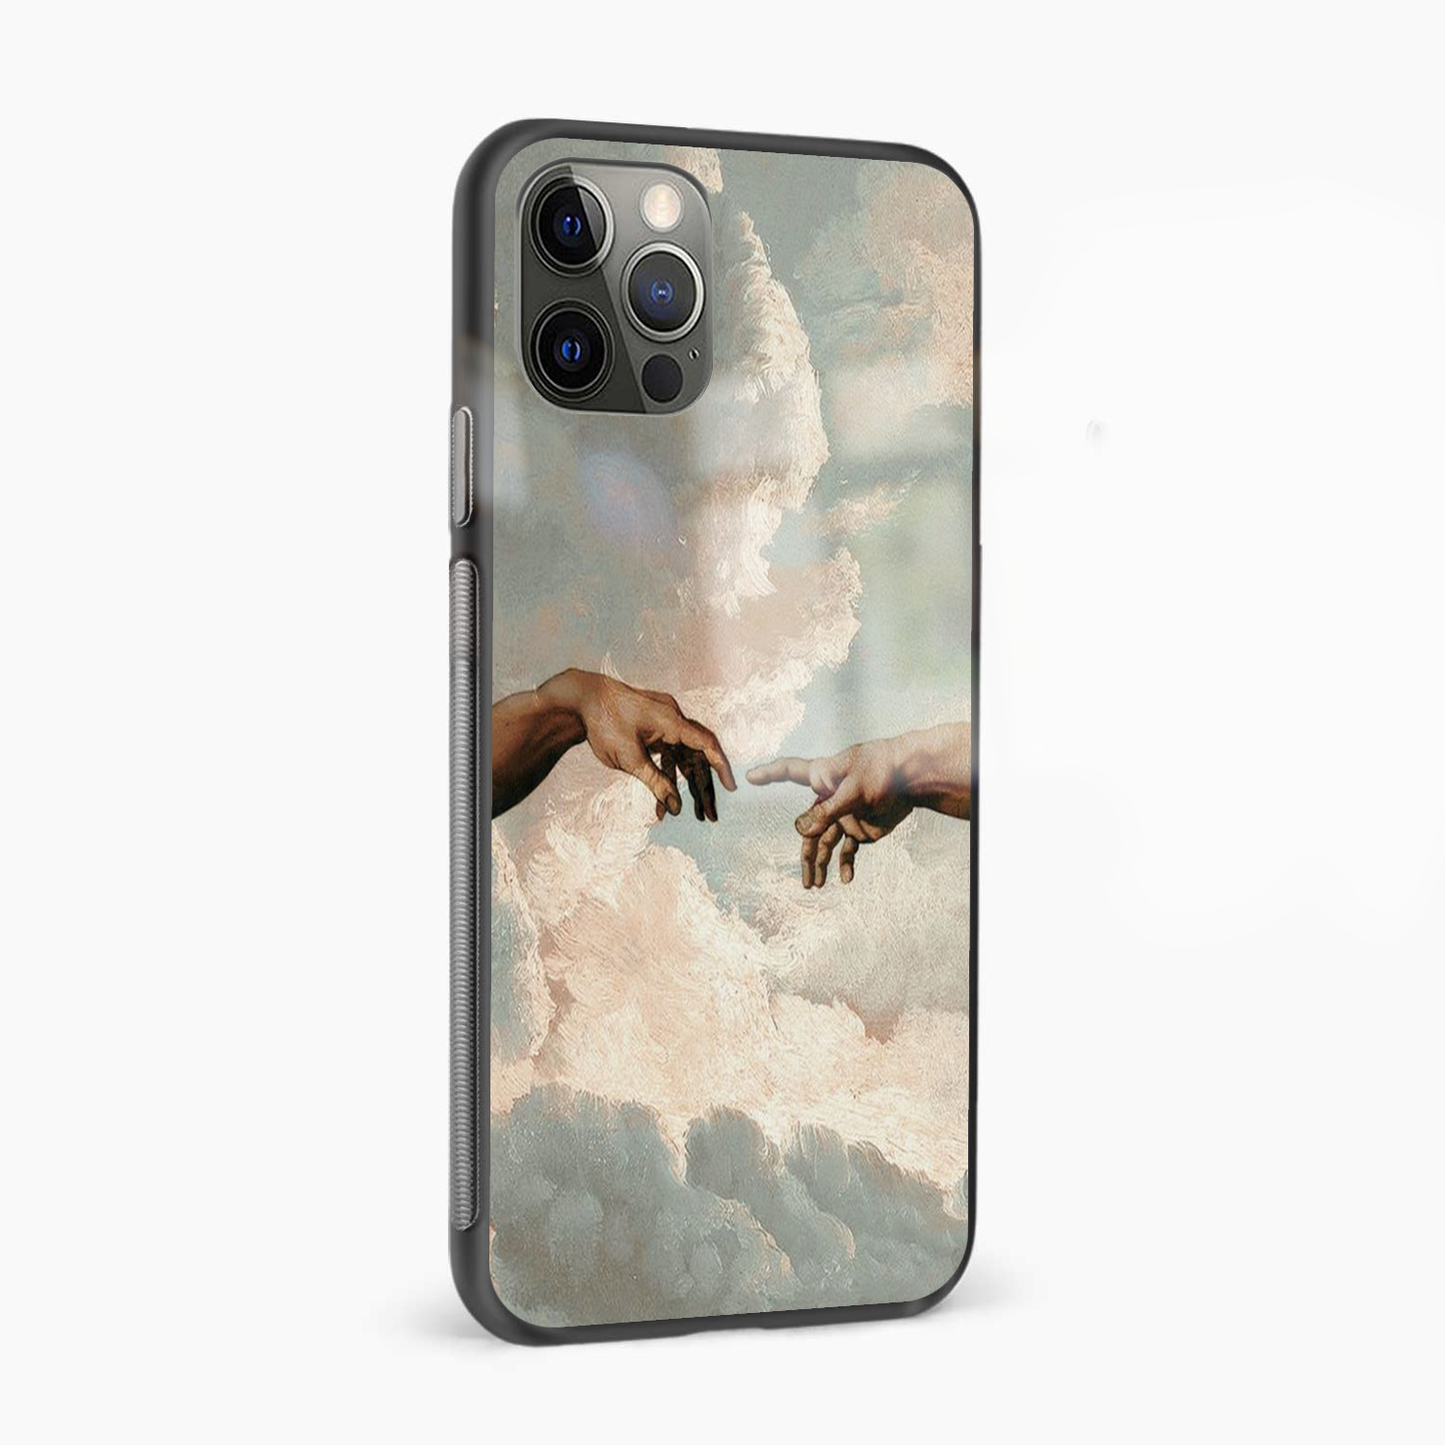 Renaissance Hands Abstract Glass Phone Case Cover - Aesthetic Phone Covers - Culltique